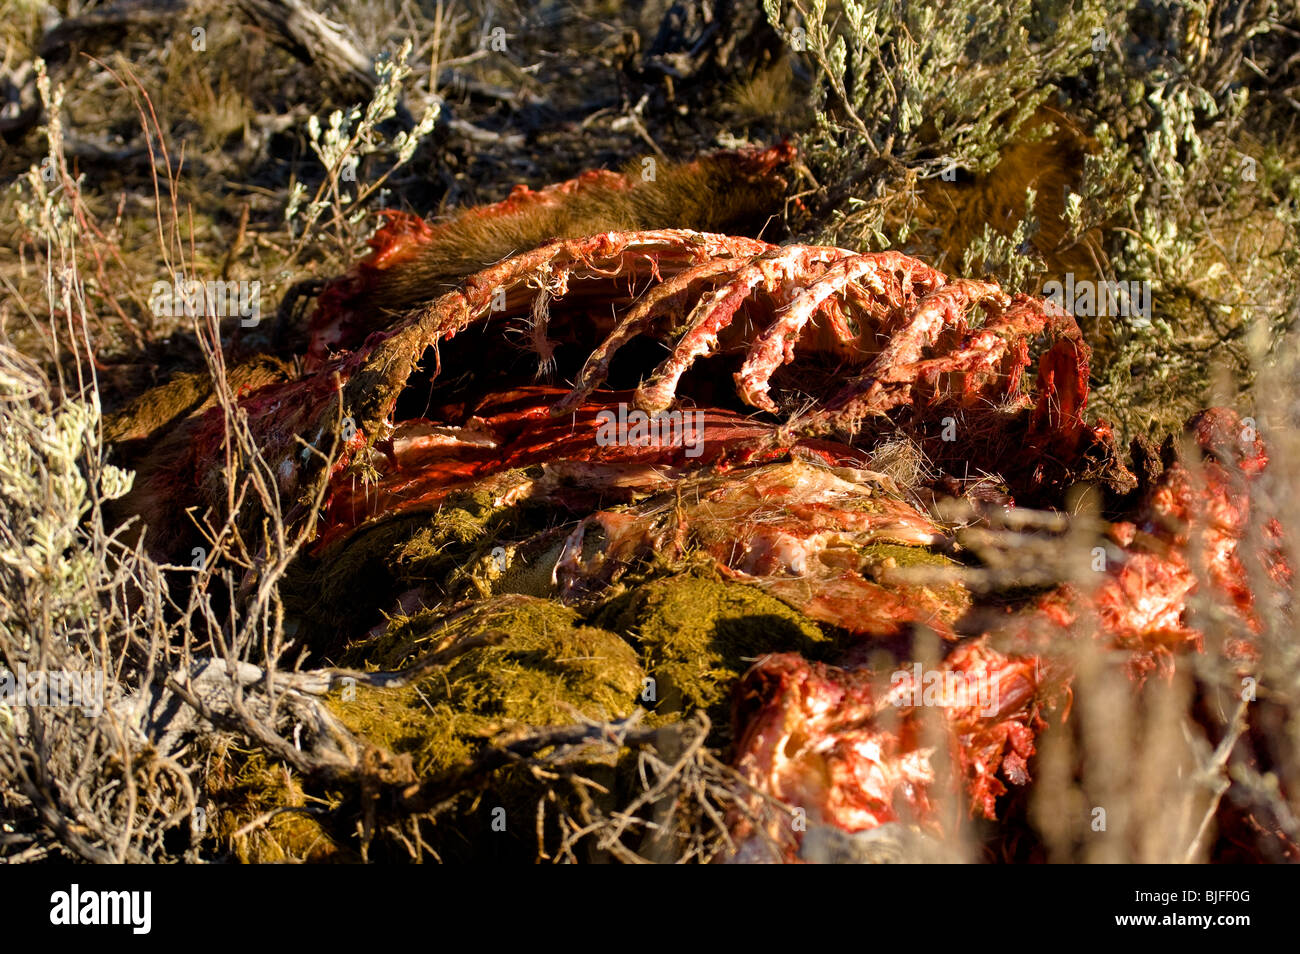 This is an image of an elk carcass after being killed by wolves. Stock Photo